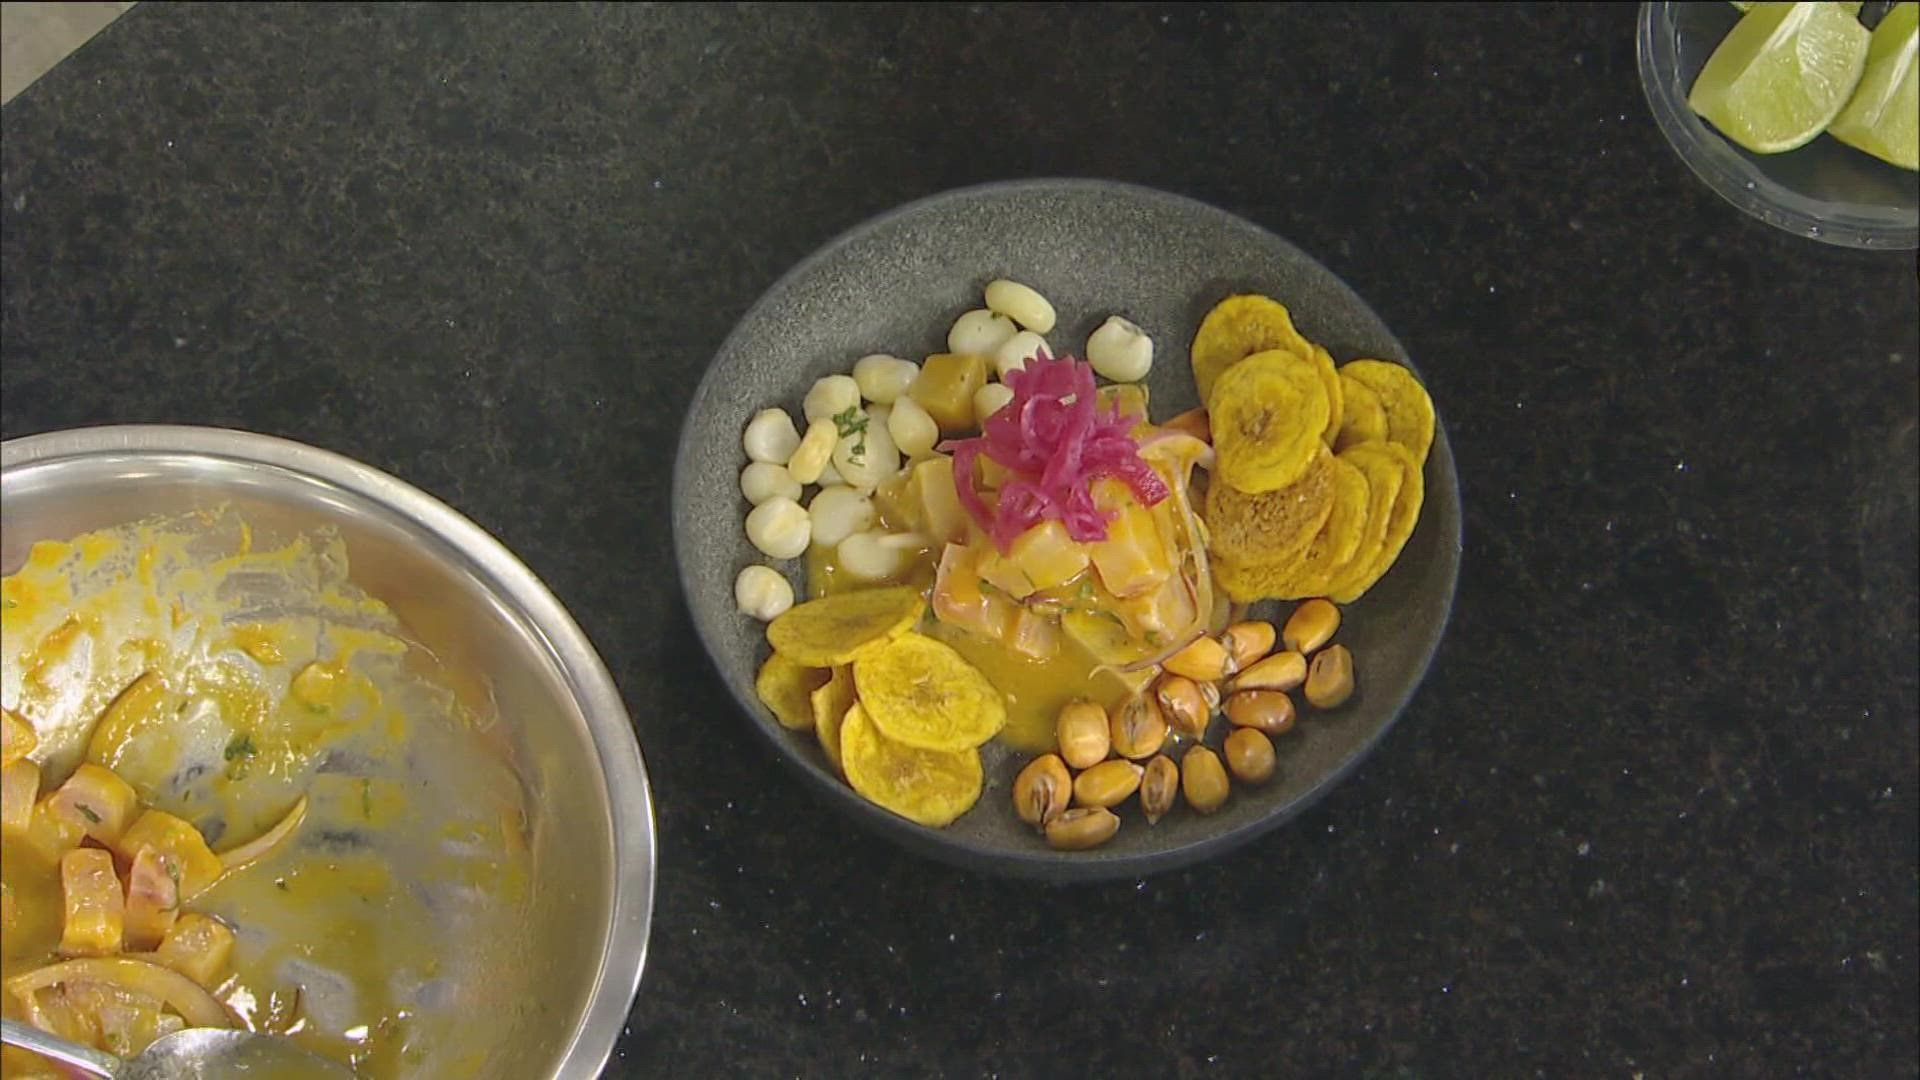 Pedro Wolcott, Owner and Chef of Guacaya Bistro, joined KARE 11 News Saturday to share his ceviche recipe.